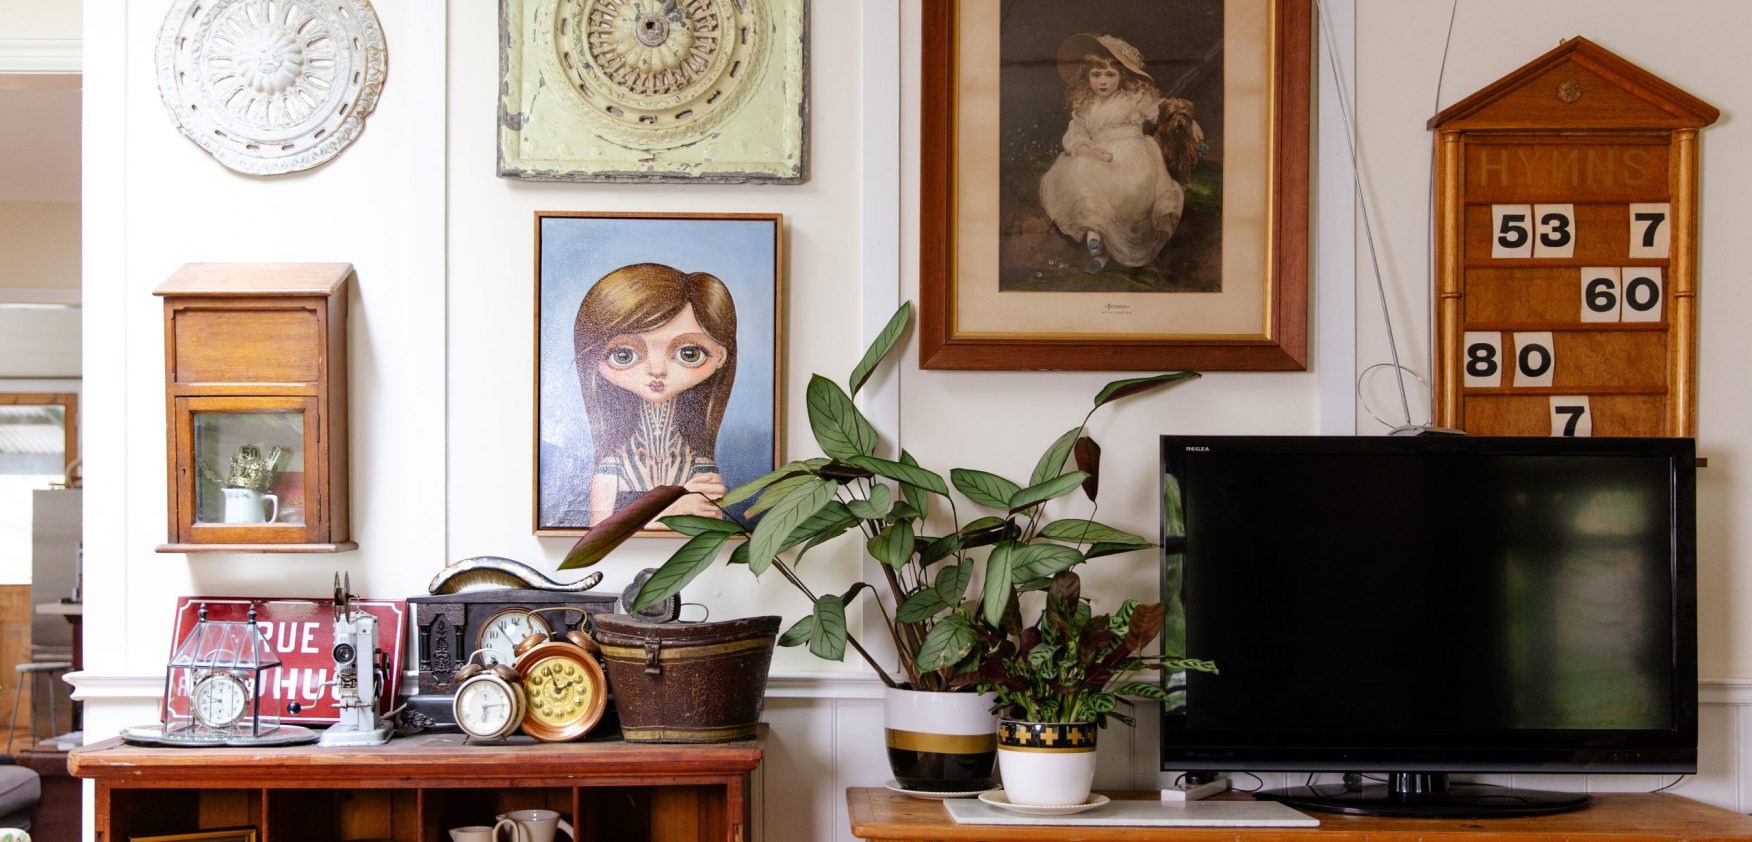 A room in Alicia's home with artwork on the wall and furniture covered with antique items.